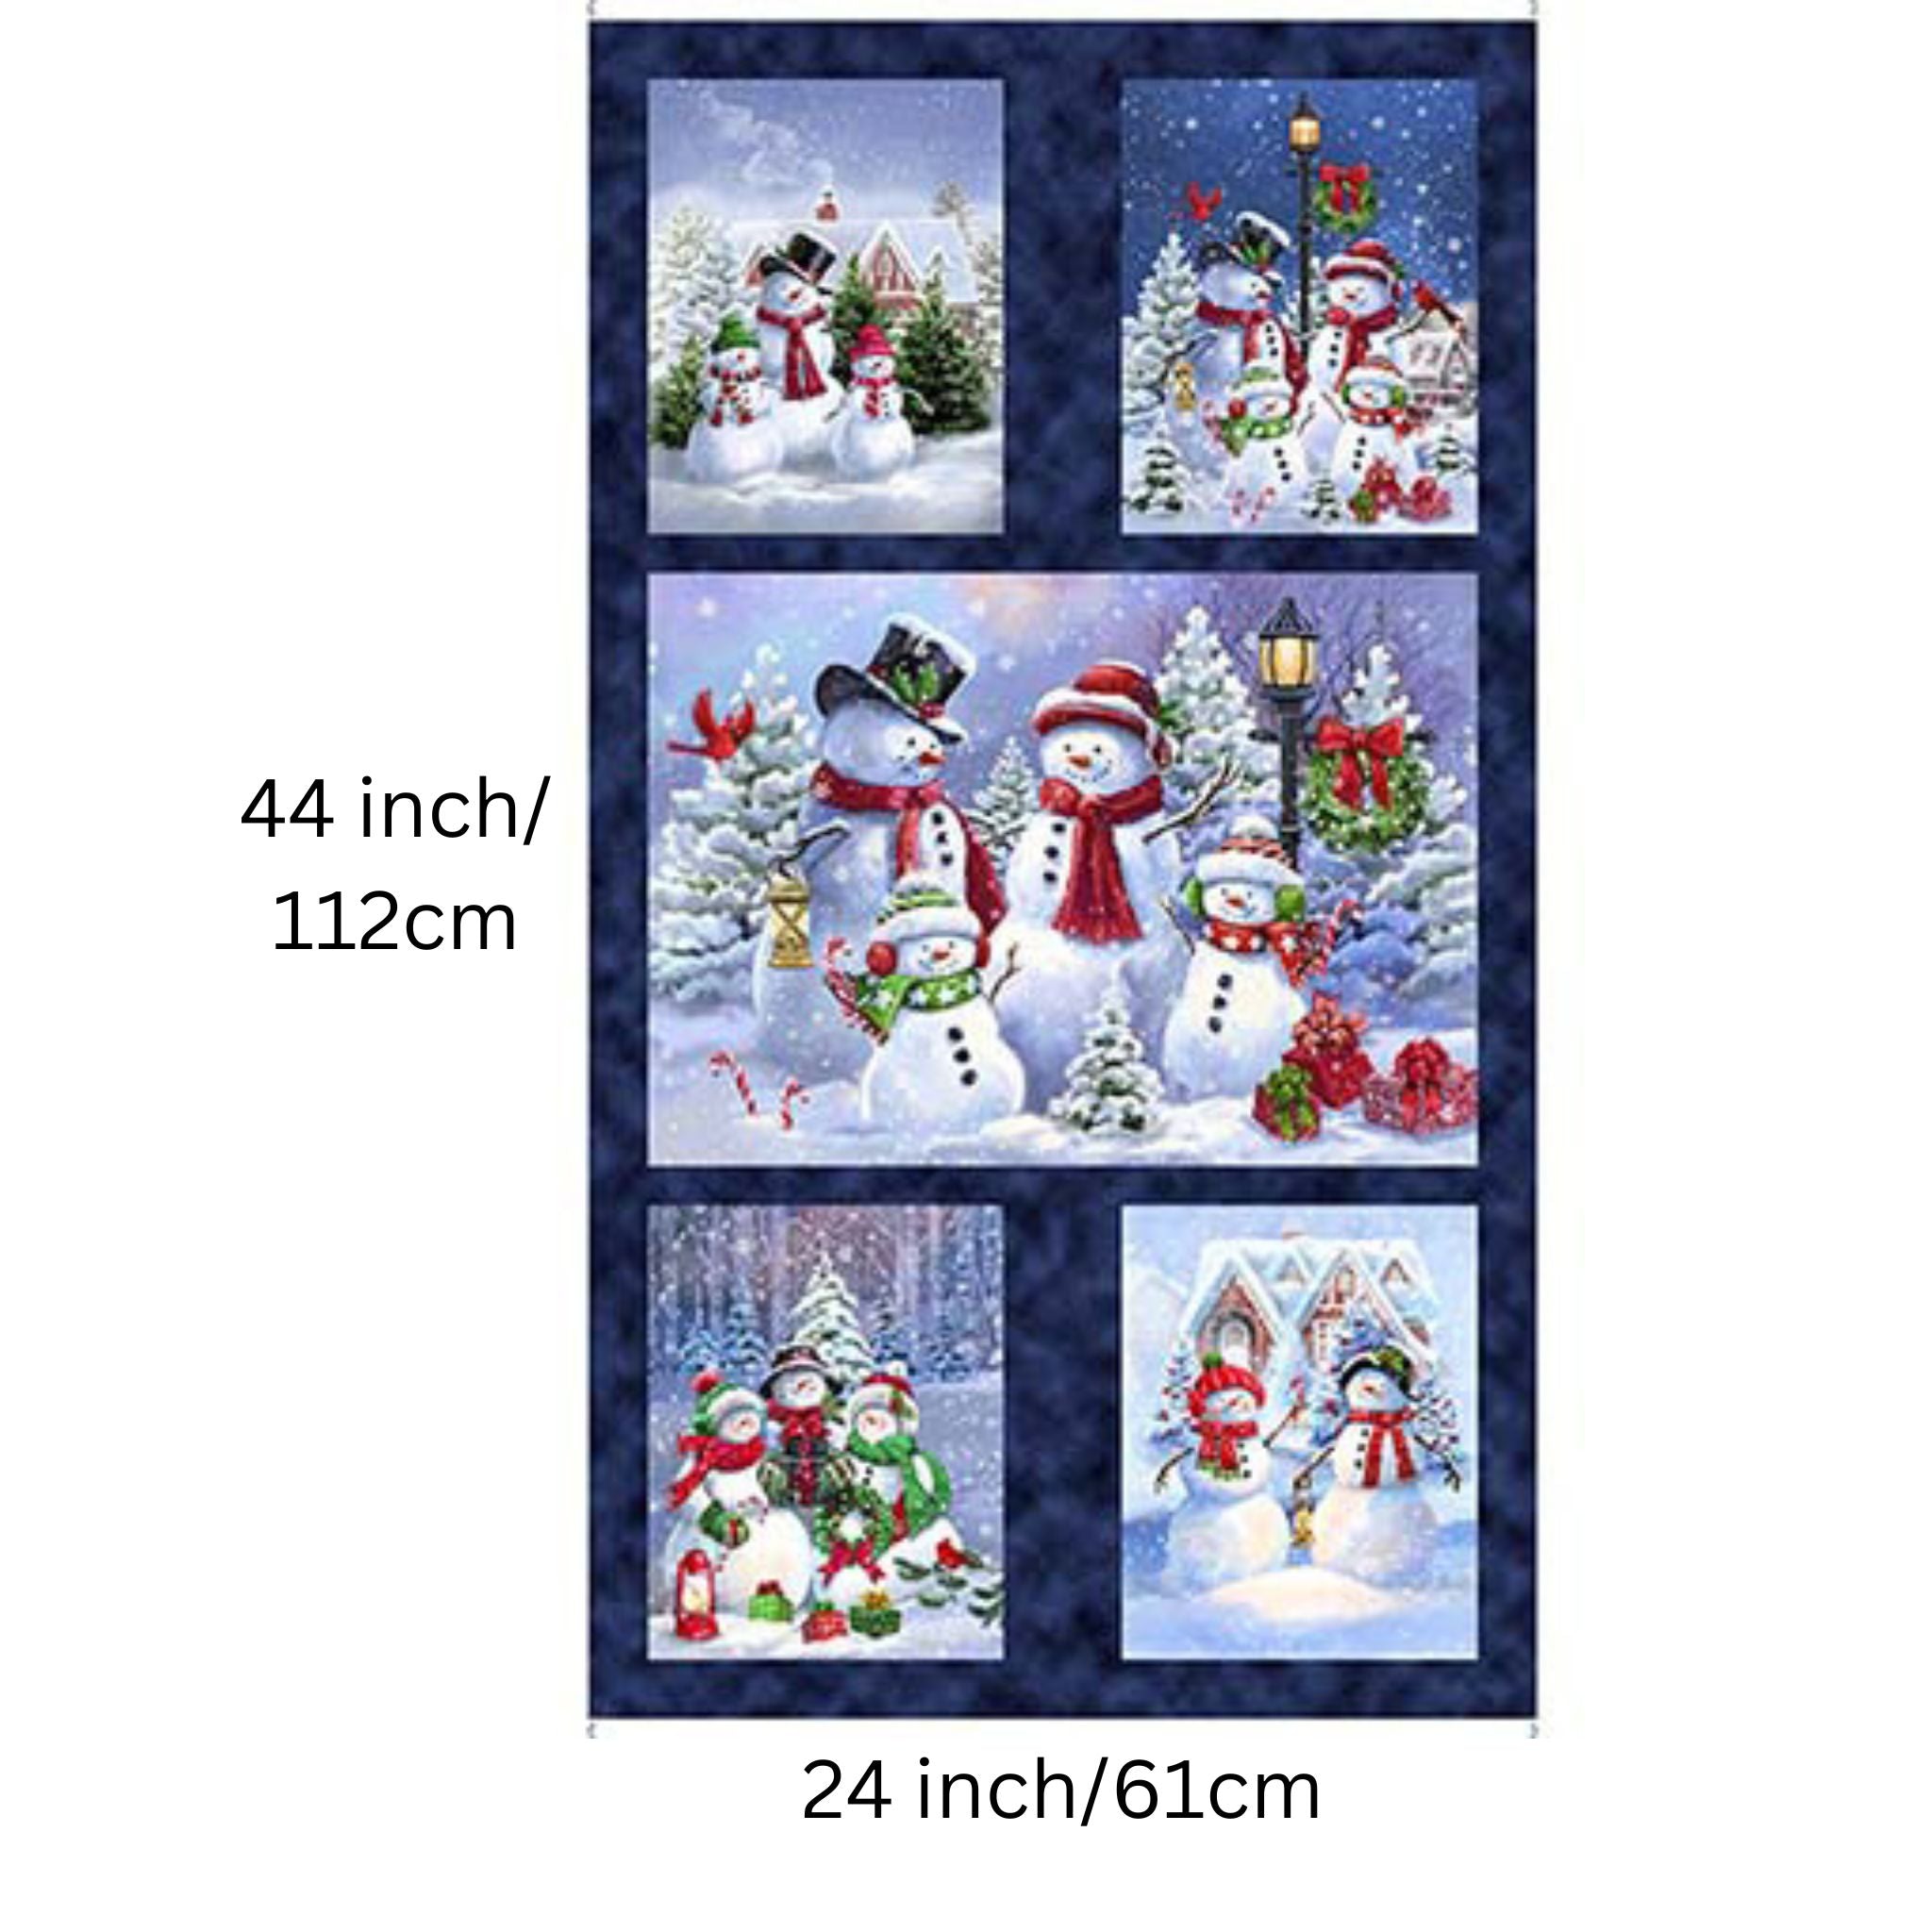 Gift Boxes and Presents - Snowman Holiday - Q T Fabrics